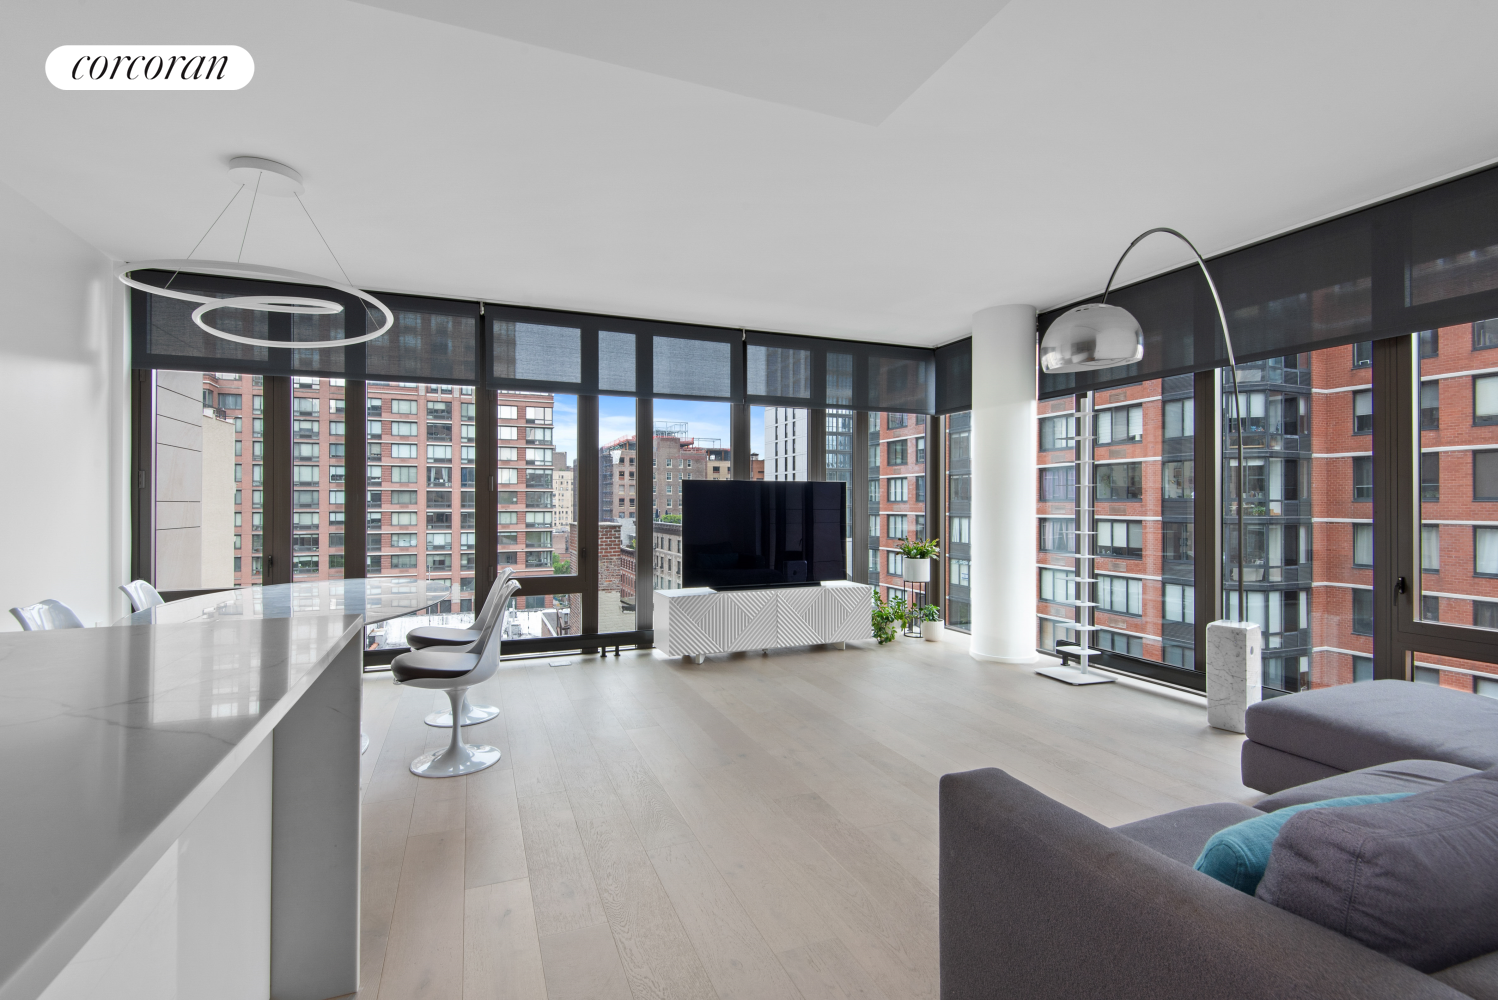 212 West 95th Street 8A, Upper West Side, Upper West Side, NYC - 3 Bedrooms  
3 Bathrooms  
5 Rooms - 